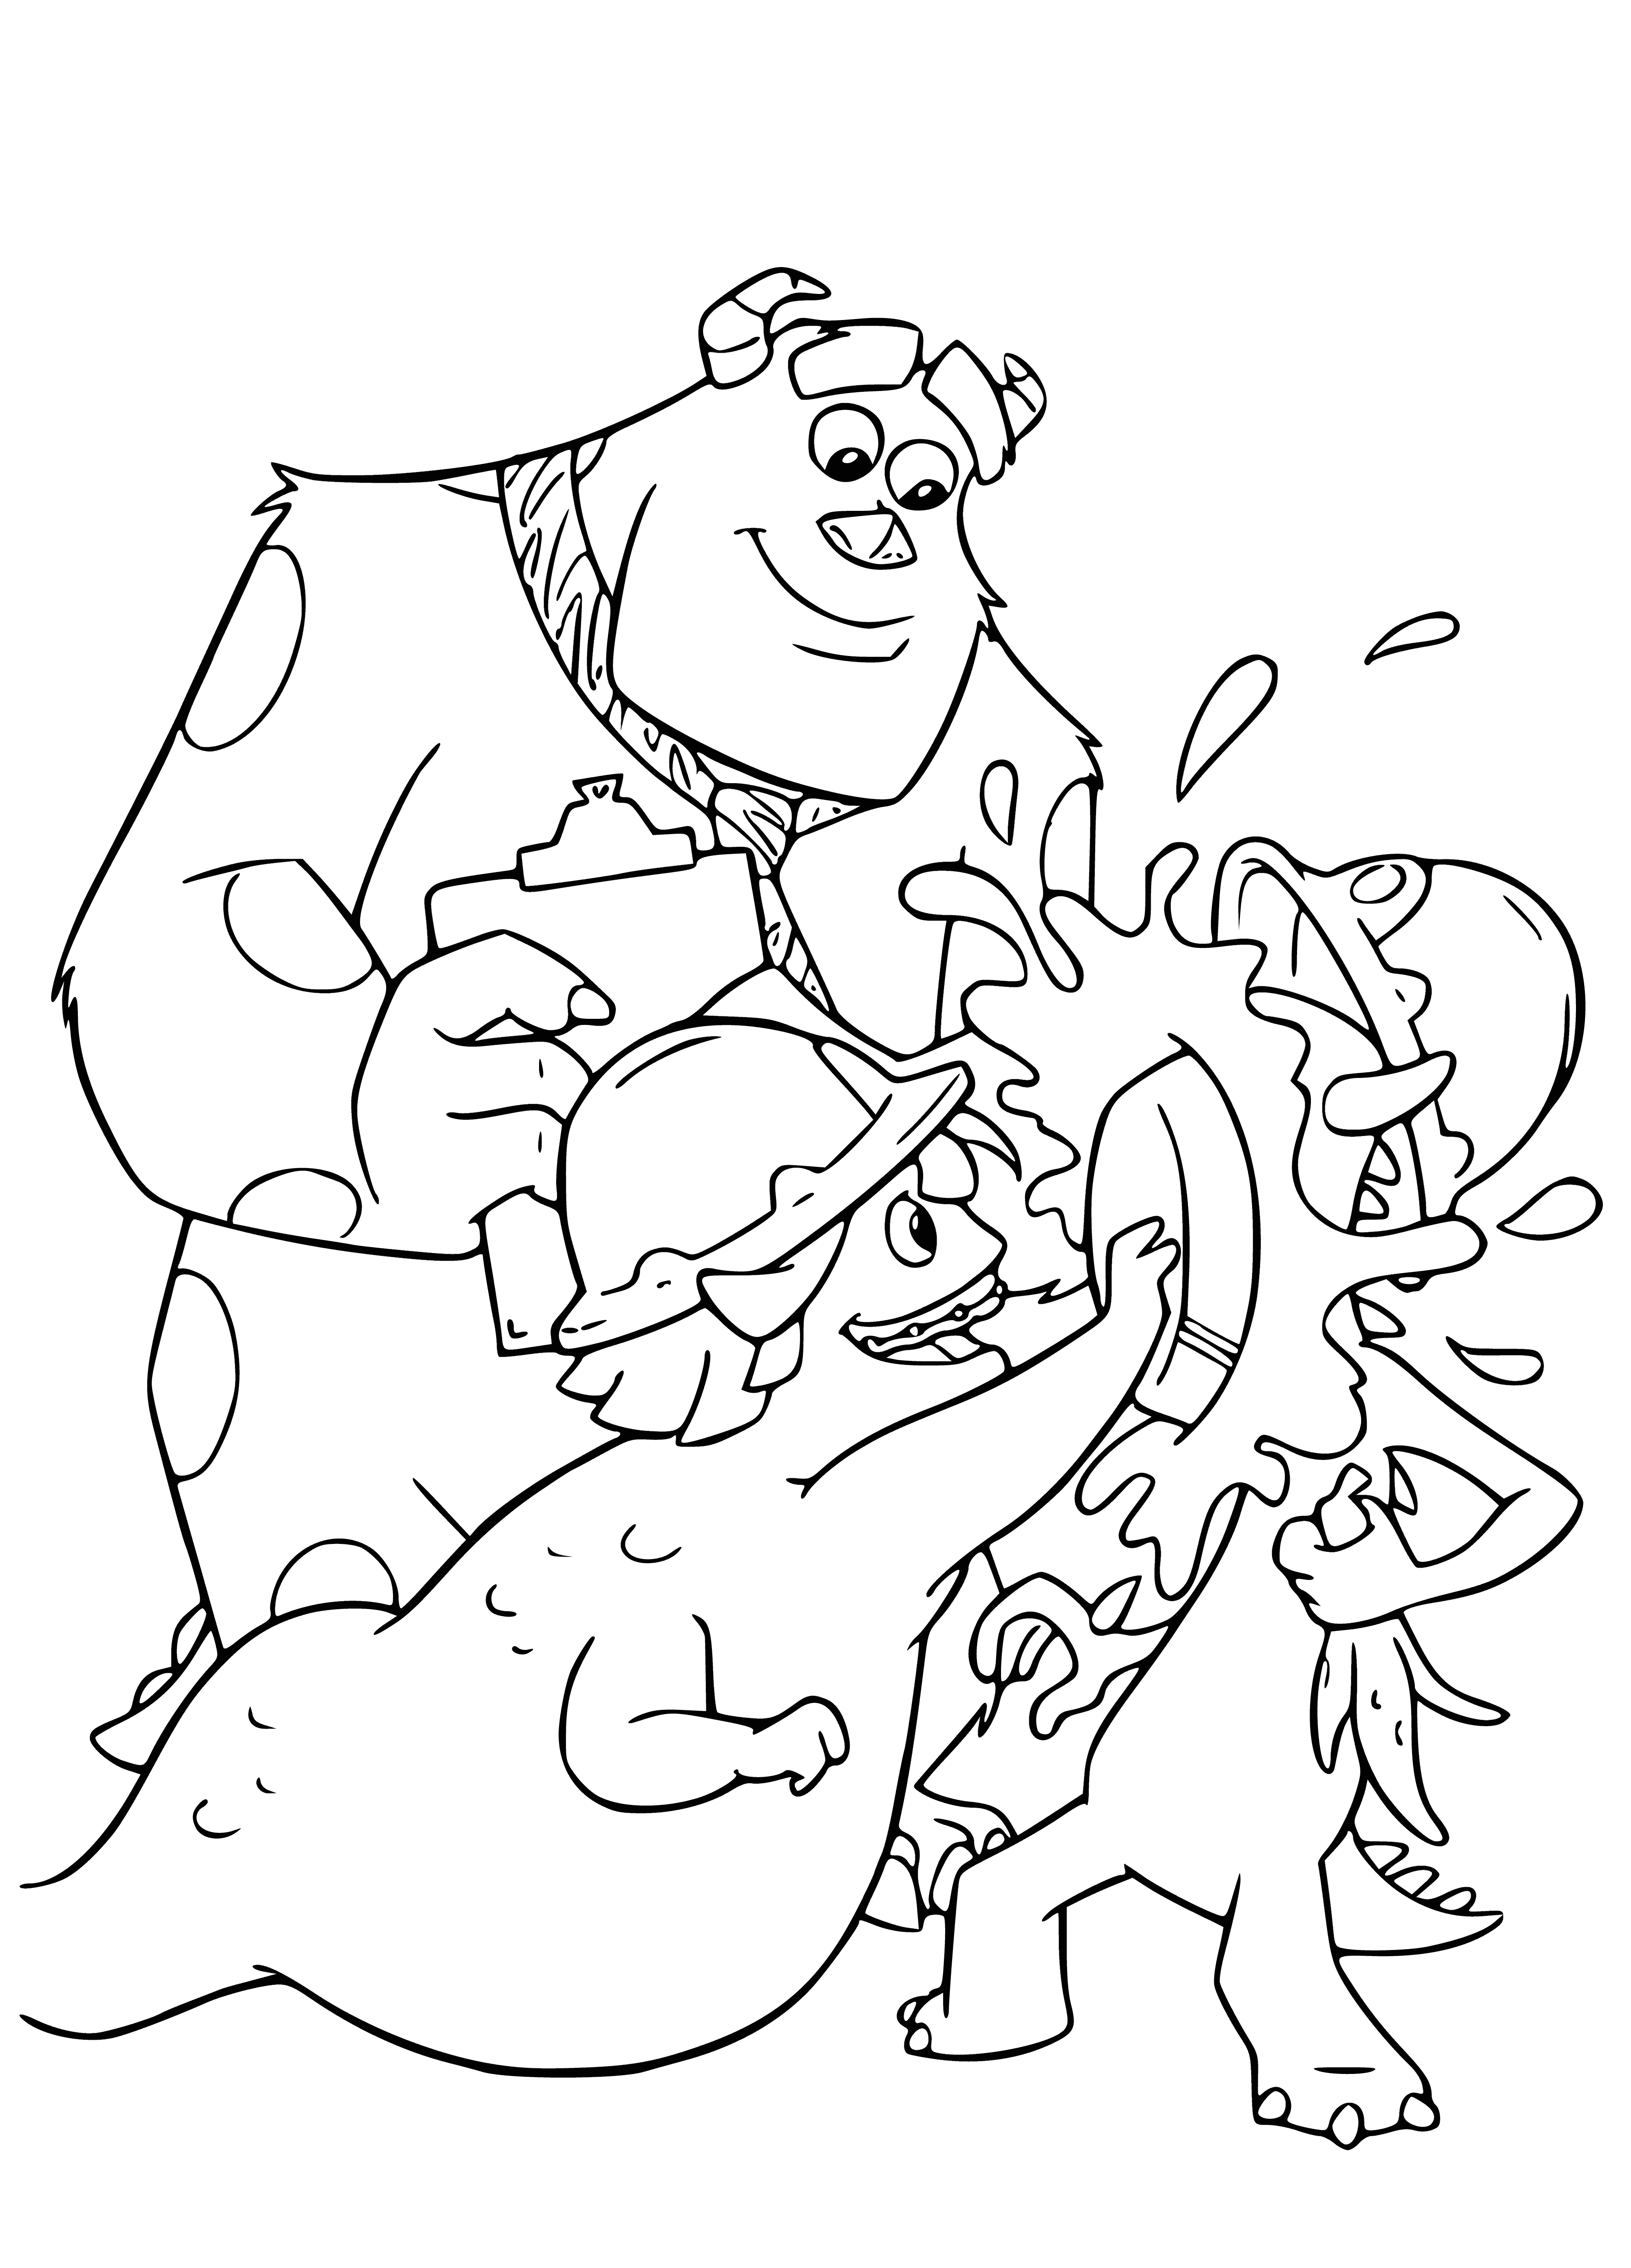 The main thing is to make you laugh! coloring page